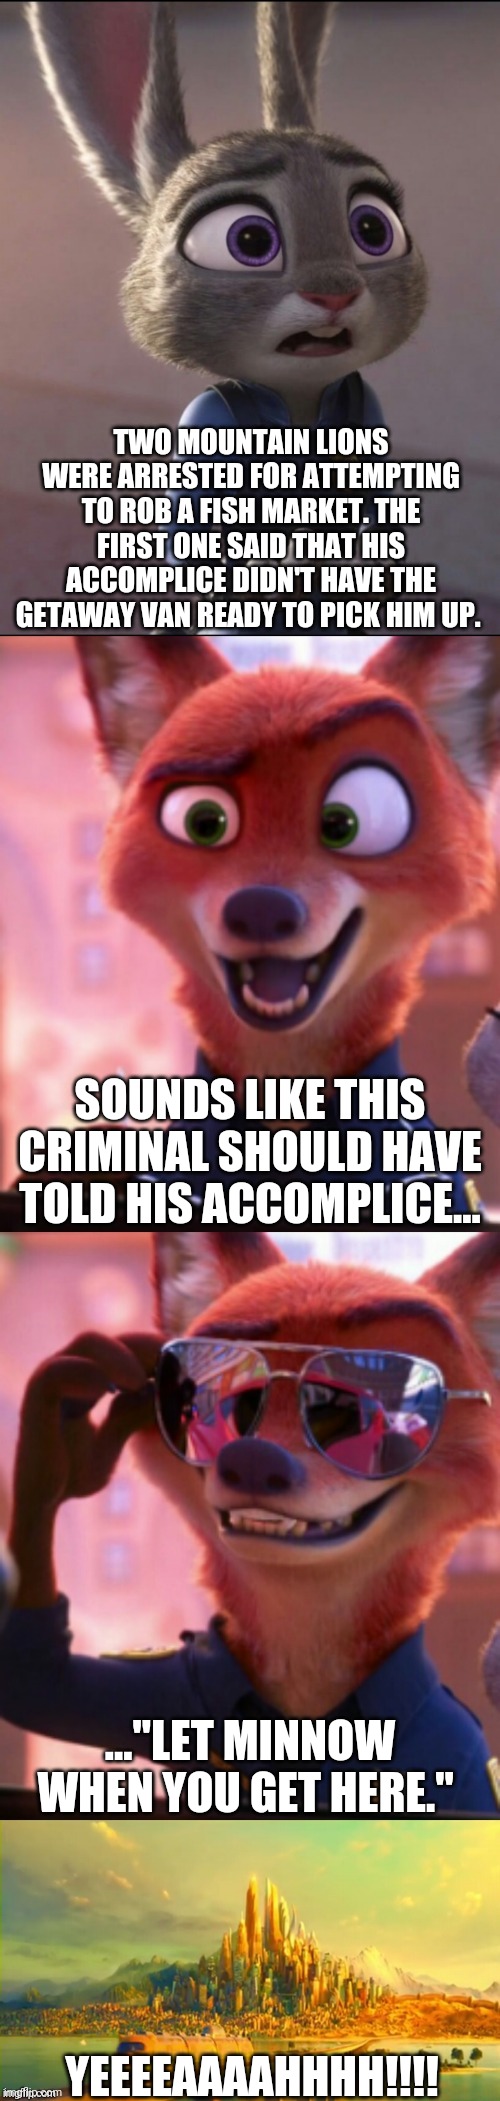 CSI: Zootopia 26 | TWO MOUNTAIN LIONS WERE ARRESTED FOR ATTEMPTING TO ROB A FISH MARKET. THE FIRST ONE SAID THAT HIS ACCOMPLICE DIDN'T HAVE THE GETAWAY VAN READY TO PICK HIM UP. SOUNDS LIKE THIS CRIMINAL SHOULD HAVE TOLD HIS ACCOMPLICE... ..."LET MINNOW WHEN YOU GET HERE."; YEEEEAAAAHHHH!!!! | image tagged in csi zootopia,zootopia,judy hopps,nick wilde,parody,funny | made w/ Imgflip meme maker